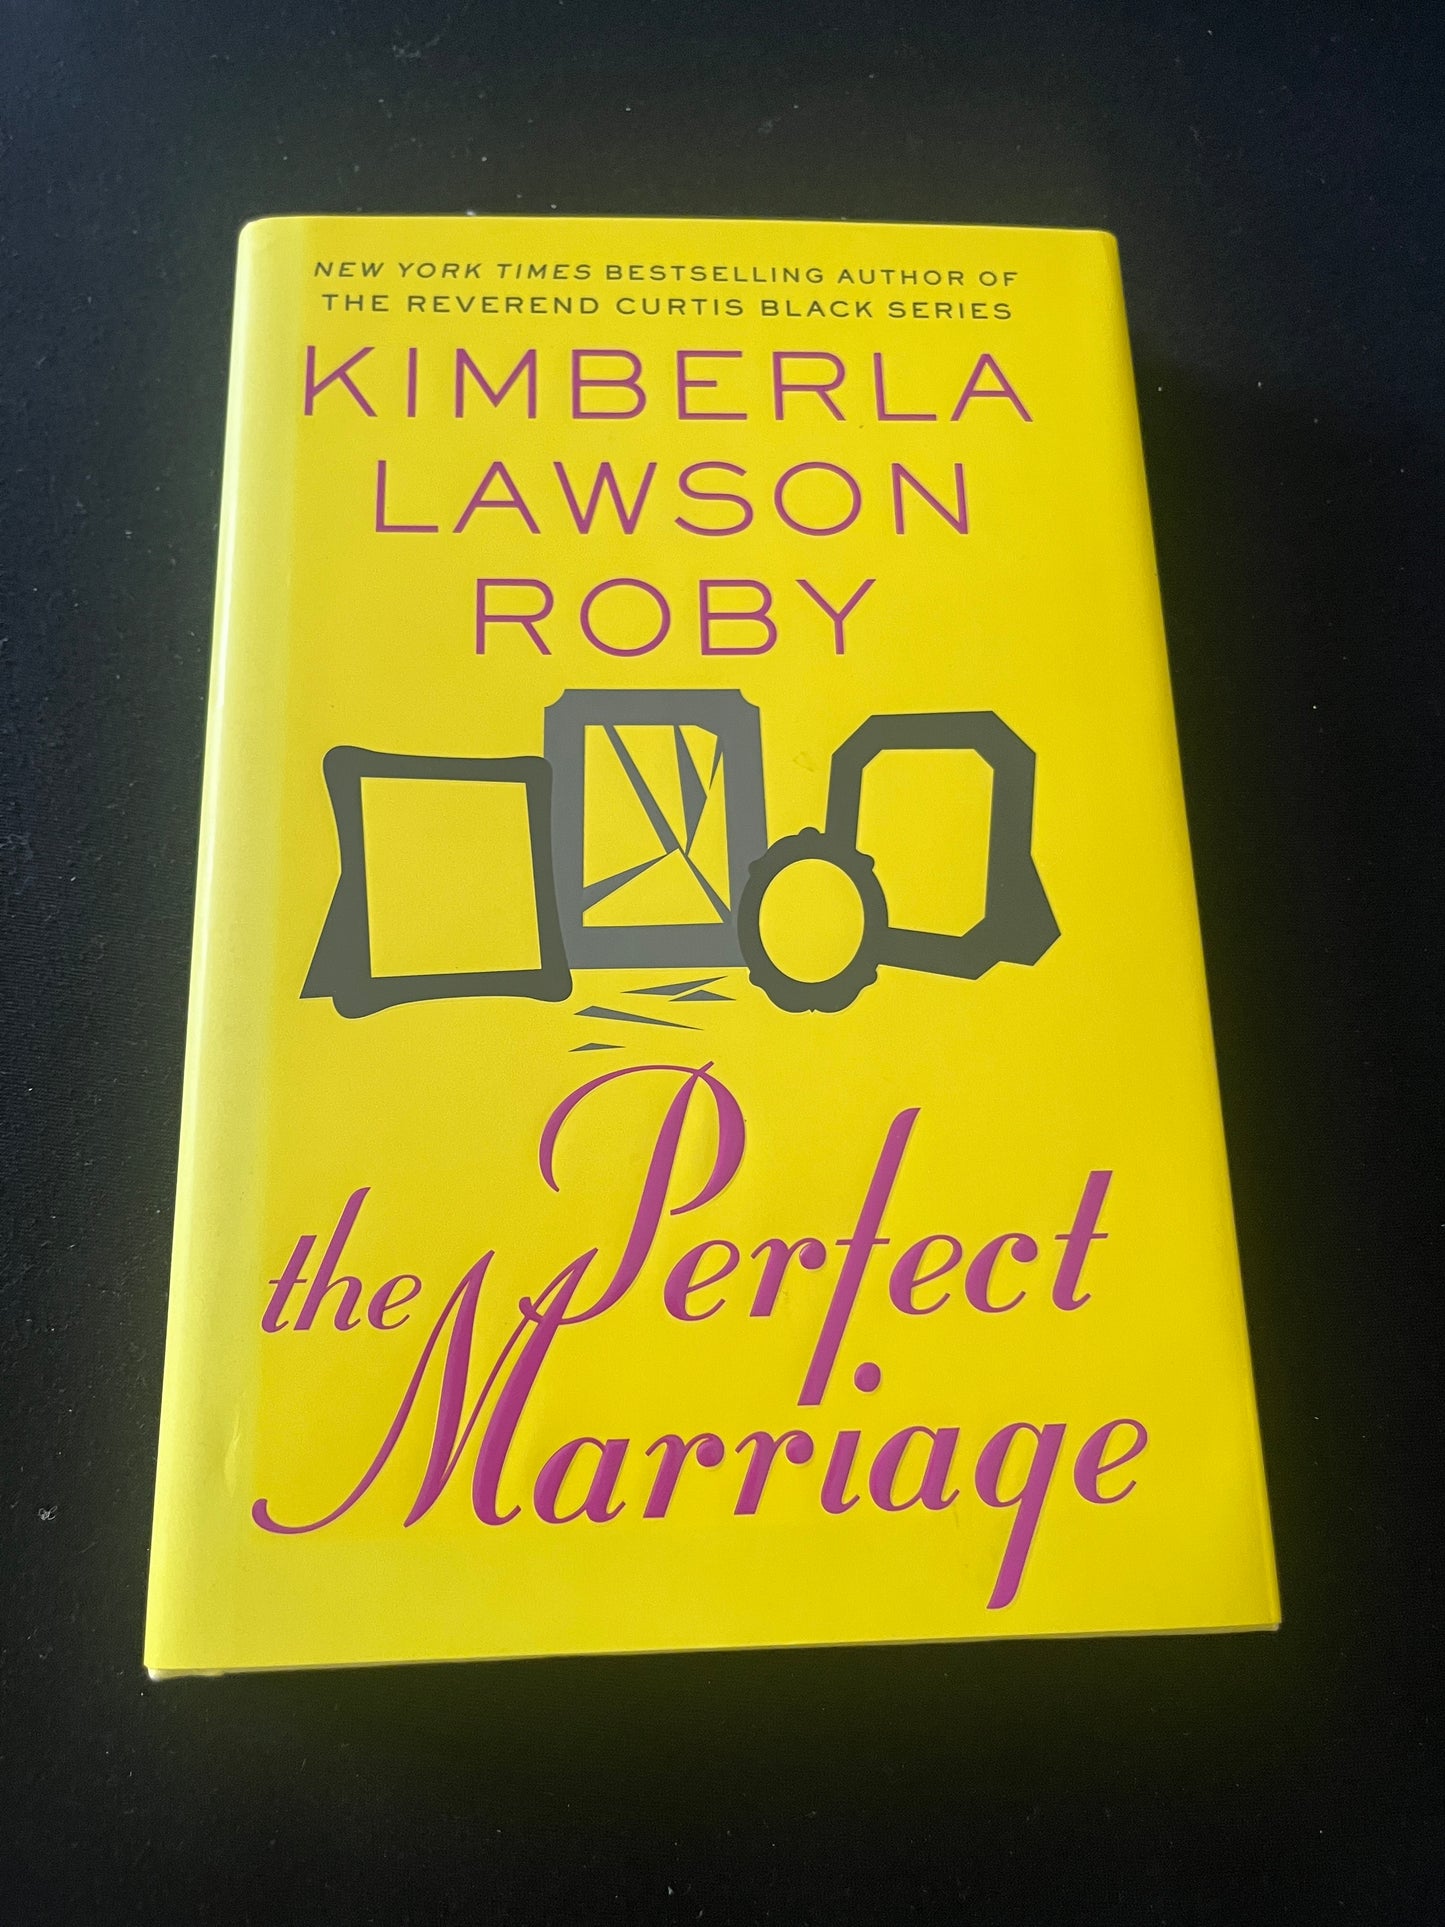 THE PERFECT MARRIAGE by Kimberla Lawson Roby